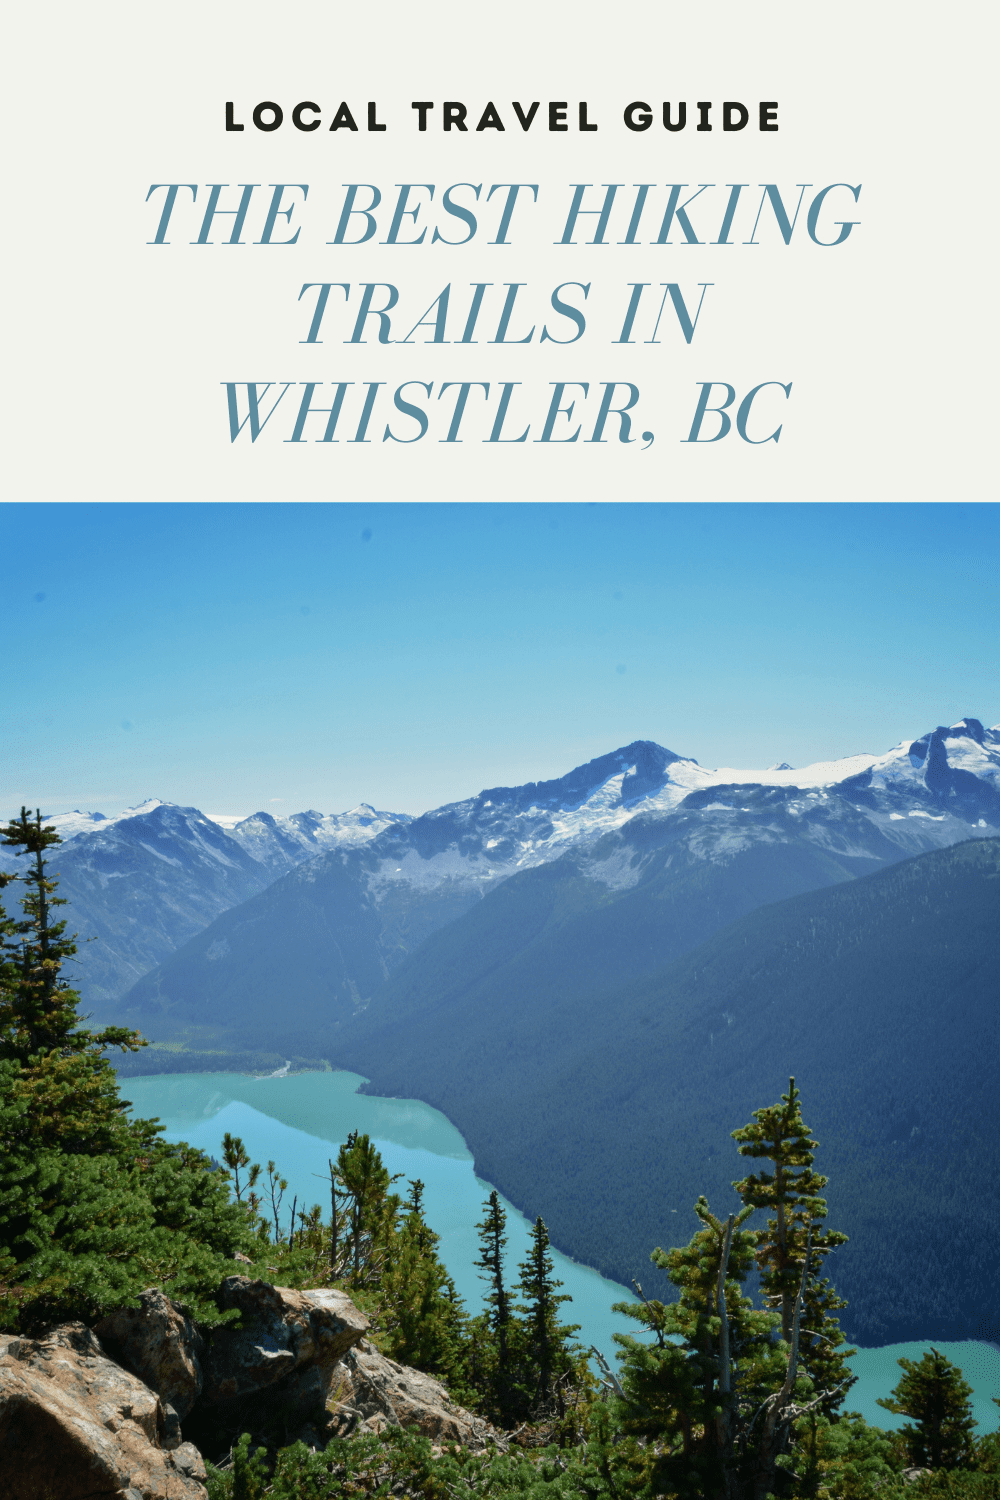 Five of the Best Hiking Trails in Whistler, B.C.